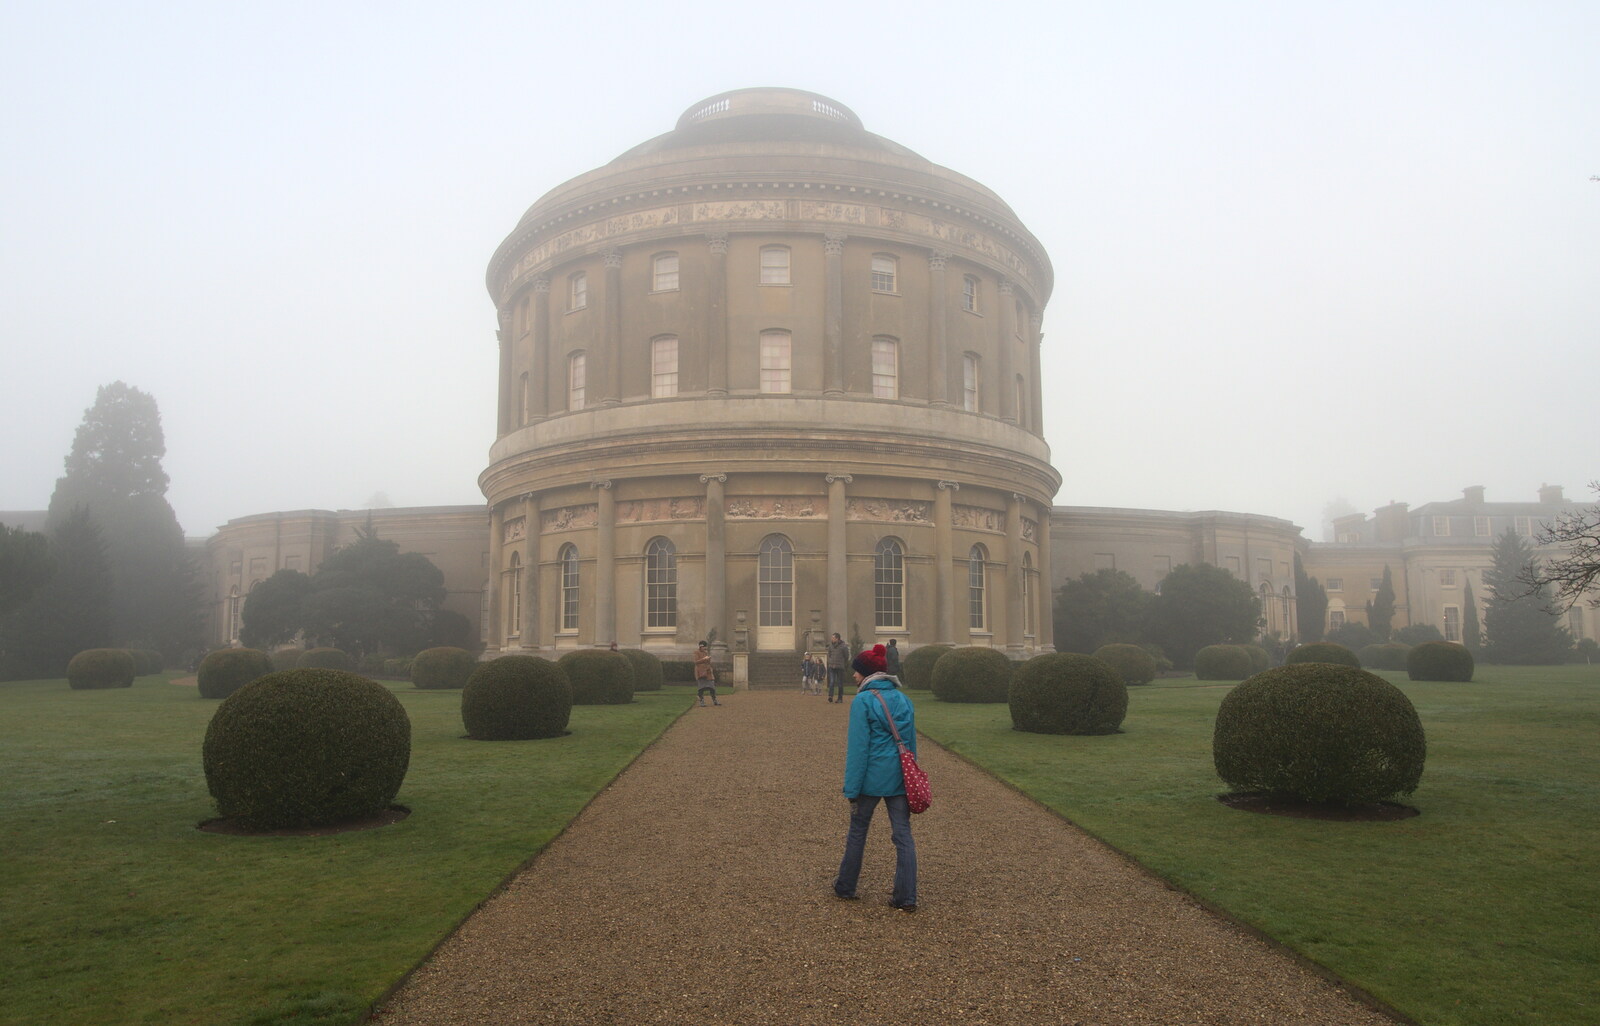 Isobel and the rotunda from A Trip to Ickworth House, Horringer, Suffolk - 30th December 2016